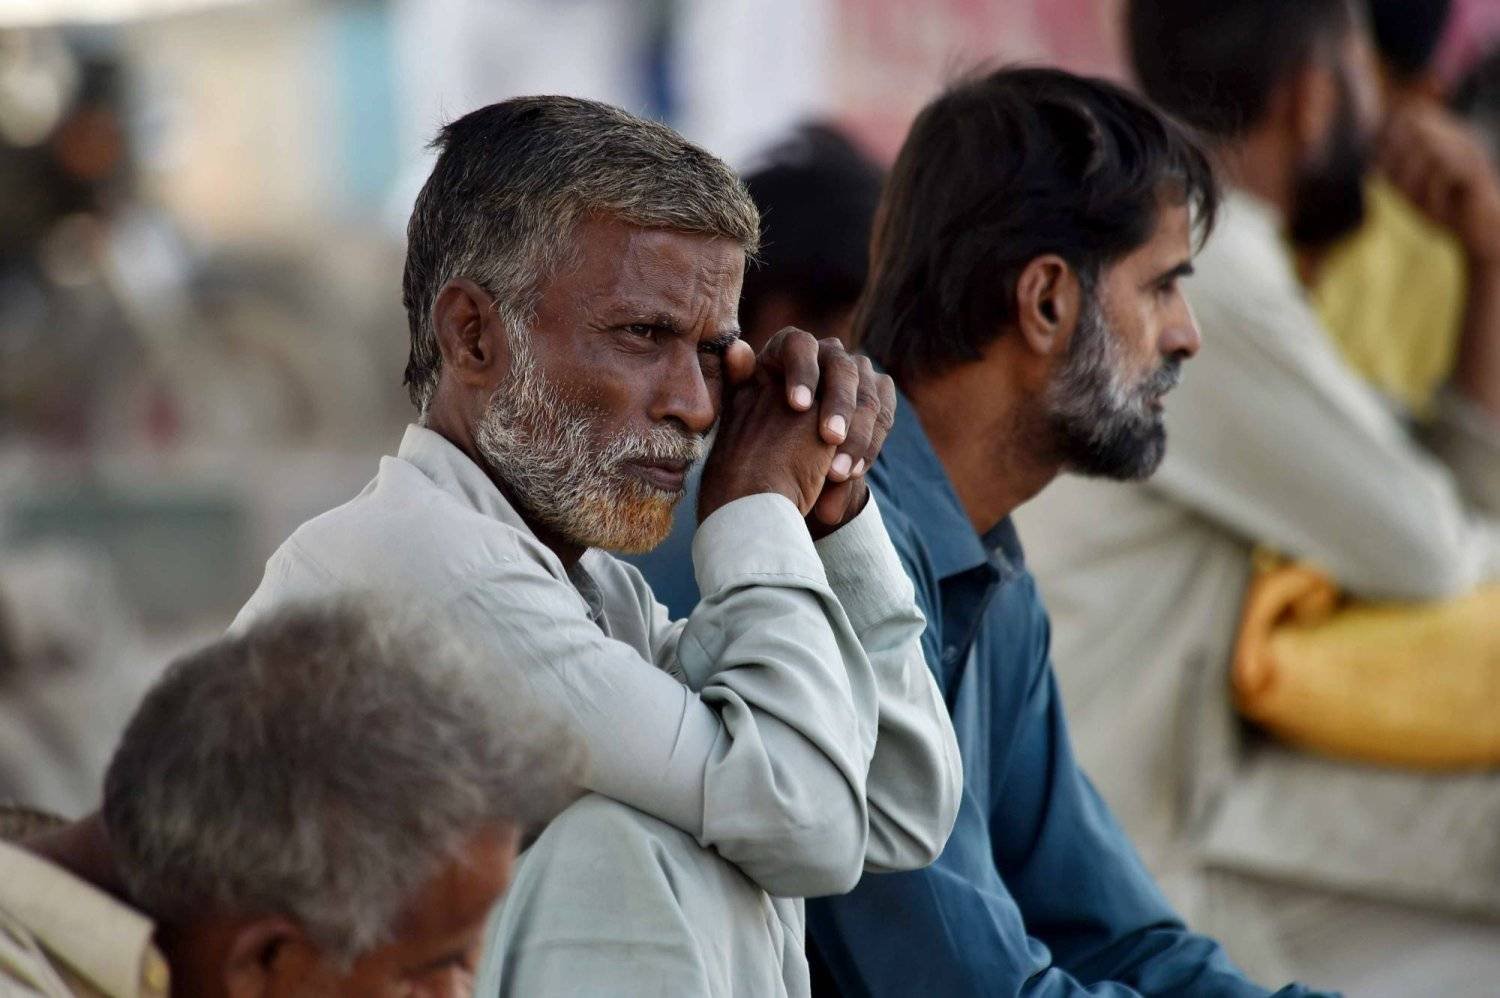 Laborers who work on daily wages wait to get hired in Karachi, Pakistan, (EPA)

